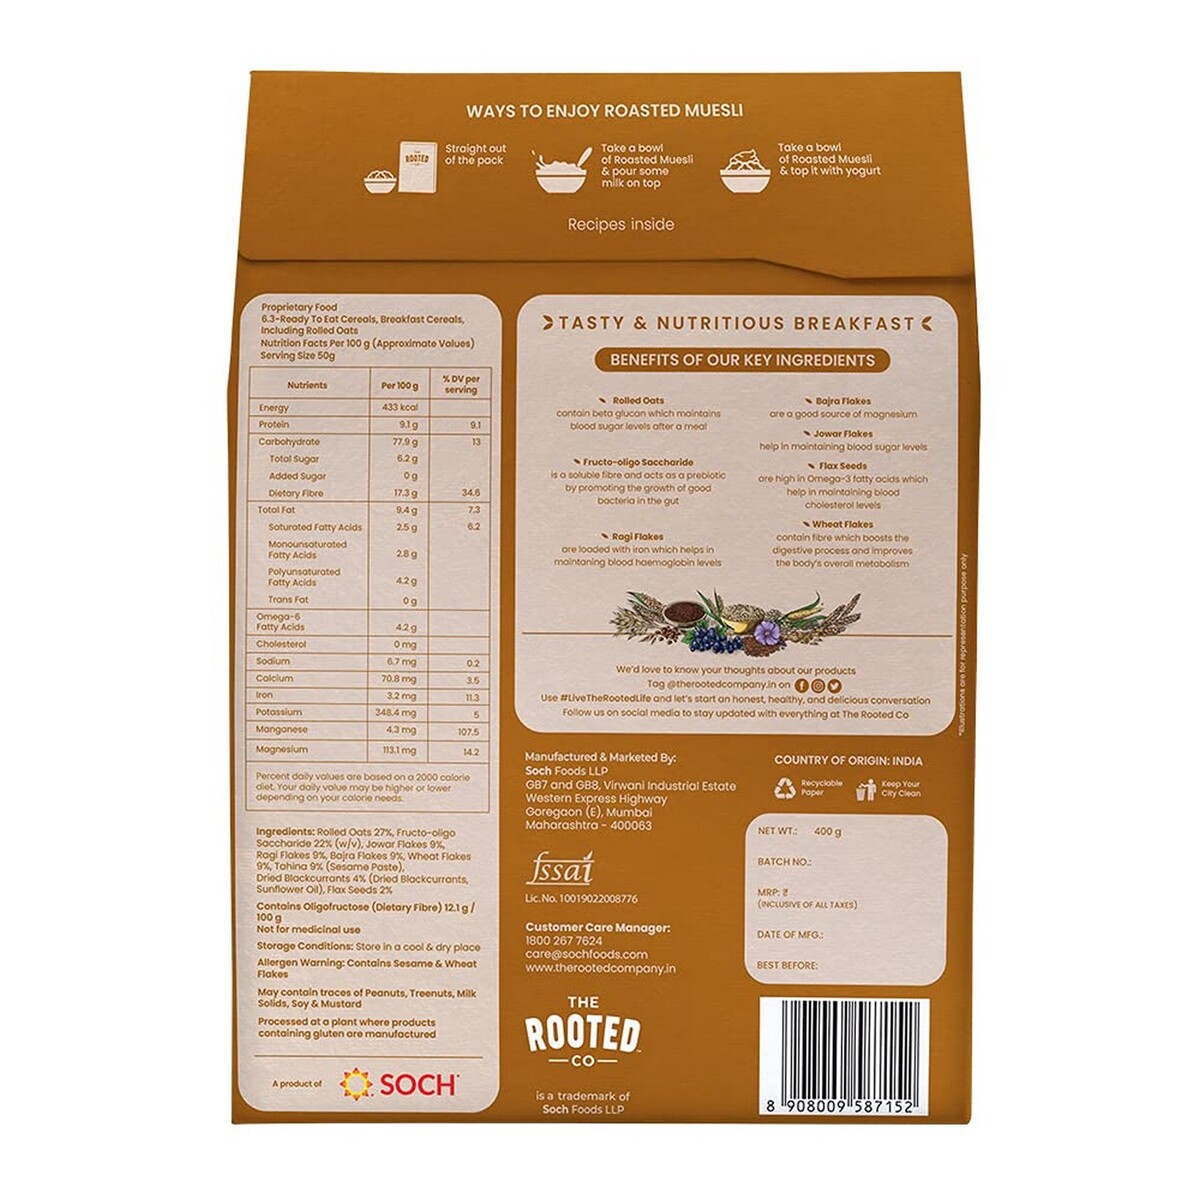 The Rooted Company Roasted Muesli Multi Millet 400g